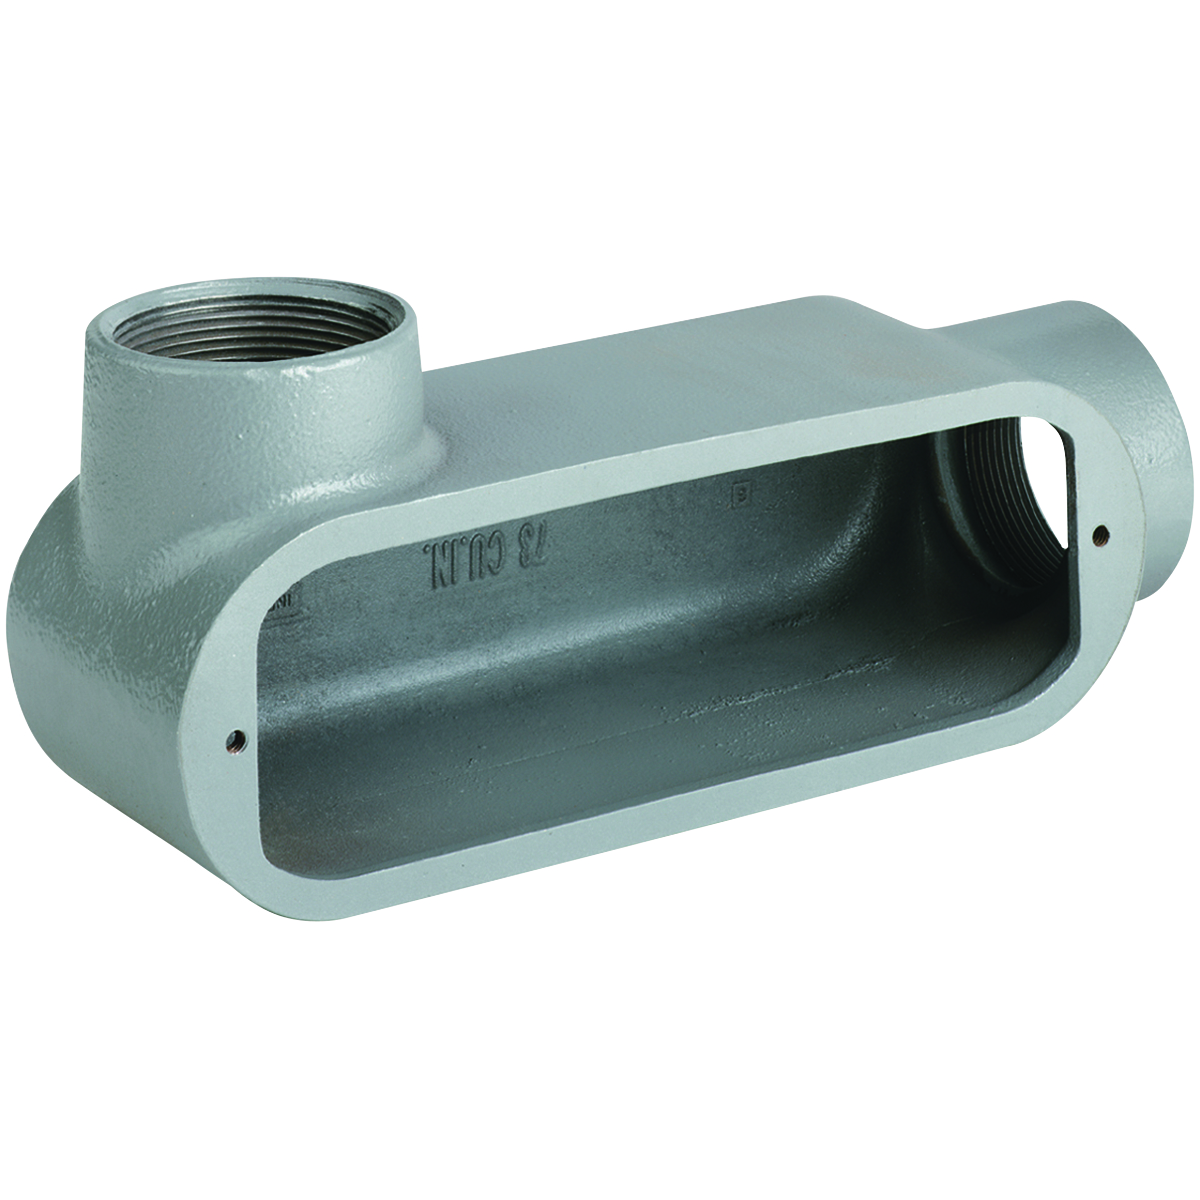 O SERIES/DURALOY 5 SERIES - MALLEABLE IRON CONDUIT BODY - LL TYPE - HUBSIZE 1-1/4 INCH - VOLUME 32.0 CUBIC INCHES